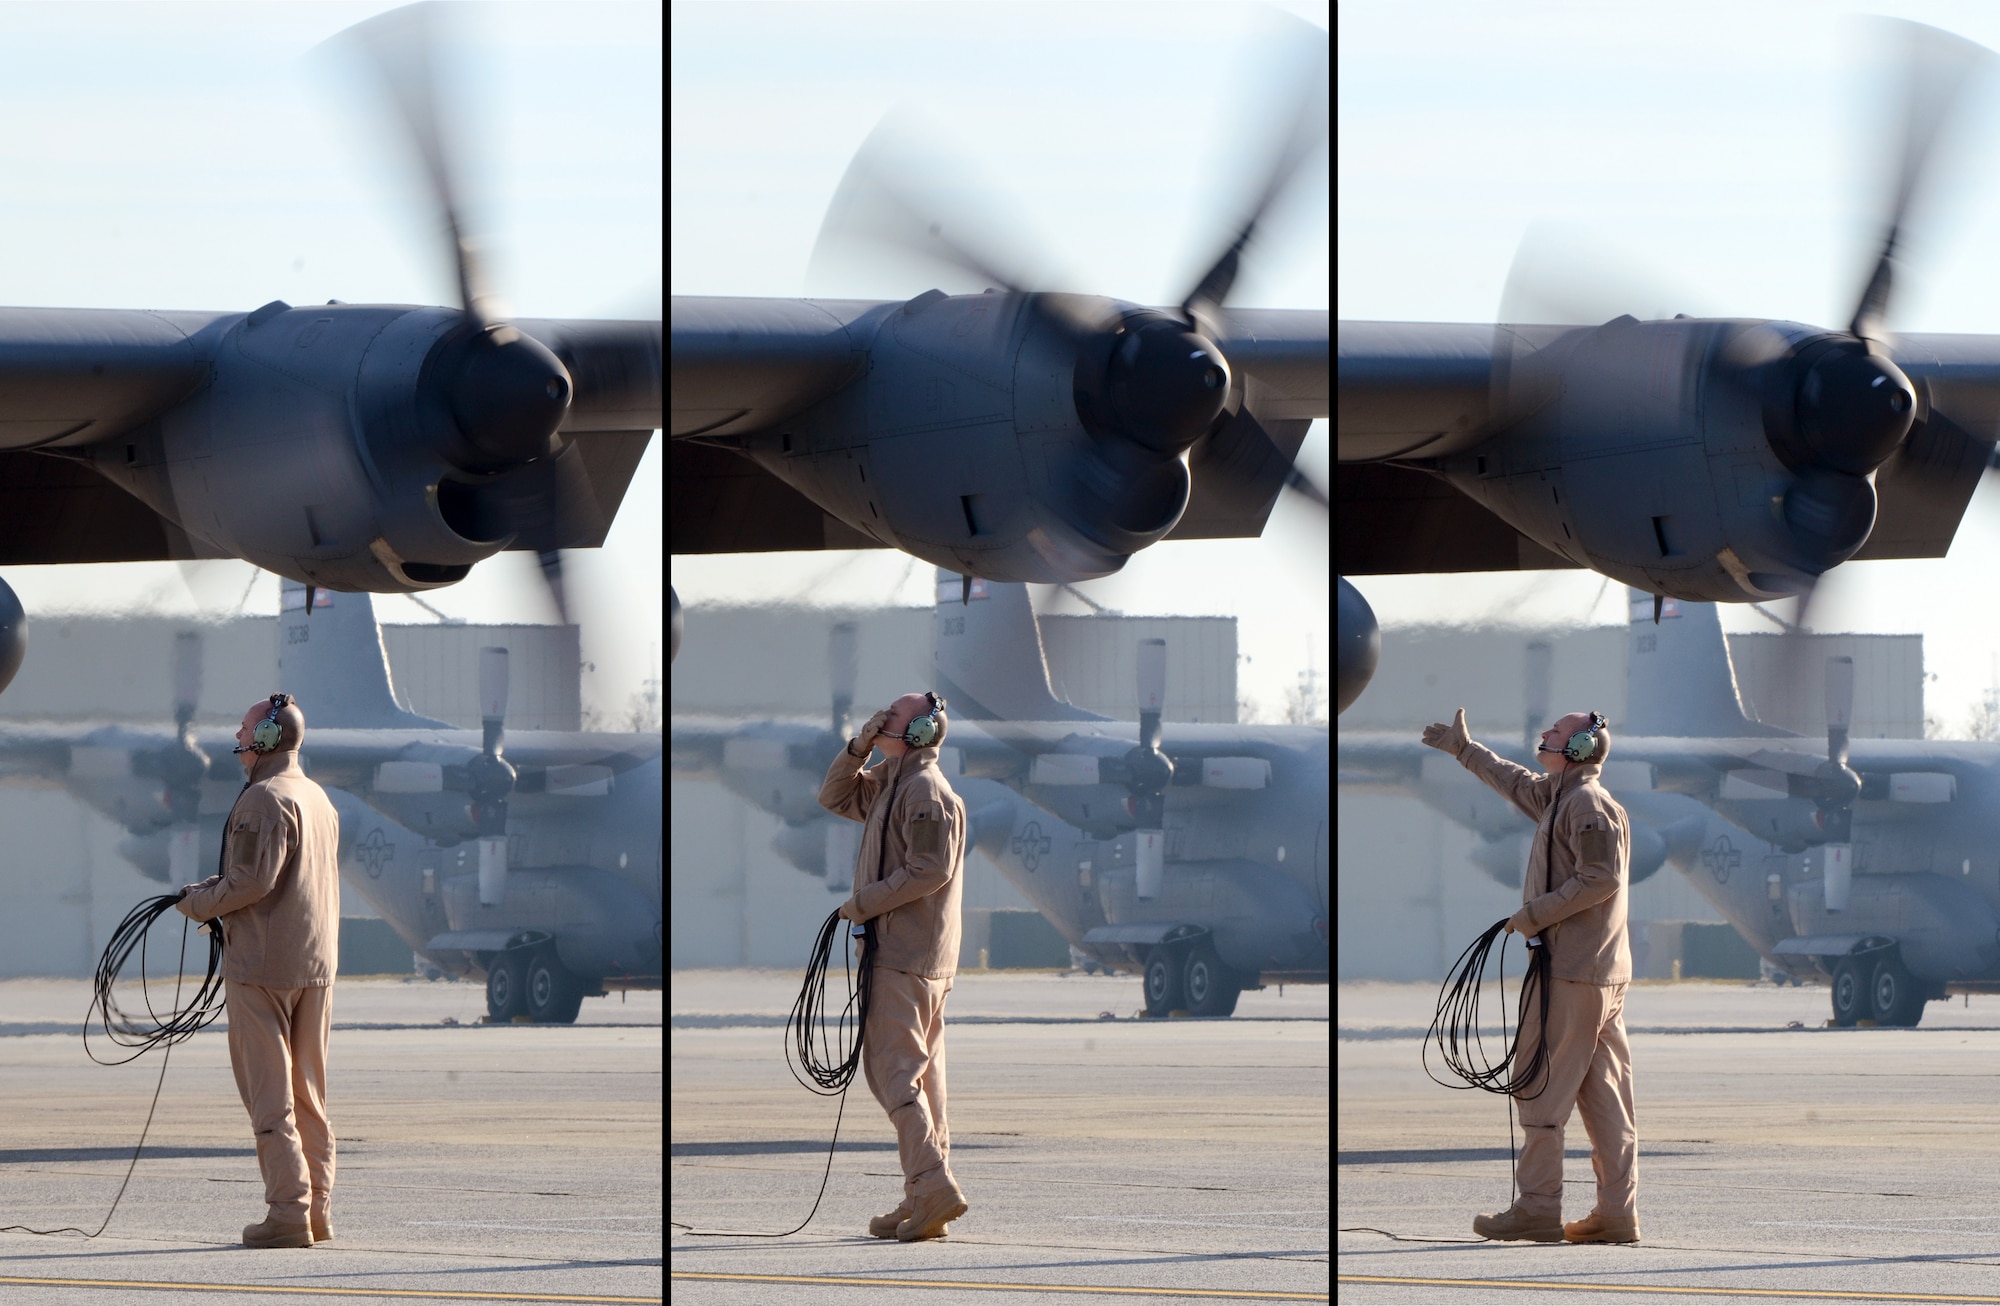 After all four engines have started Stan Eval Loadmaster, Senior Master Sgt. Bill Hutchinson says goodbye to his family, observing from the fence line, as the 94th Airlift Wing Hercules is nearly ready to deploy to Southwest Asia, Jan. 5, 2015. (U.S. Air Force photo/Brad Fallin)